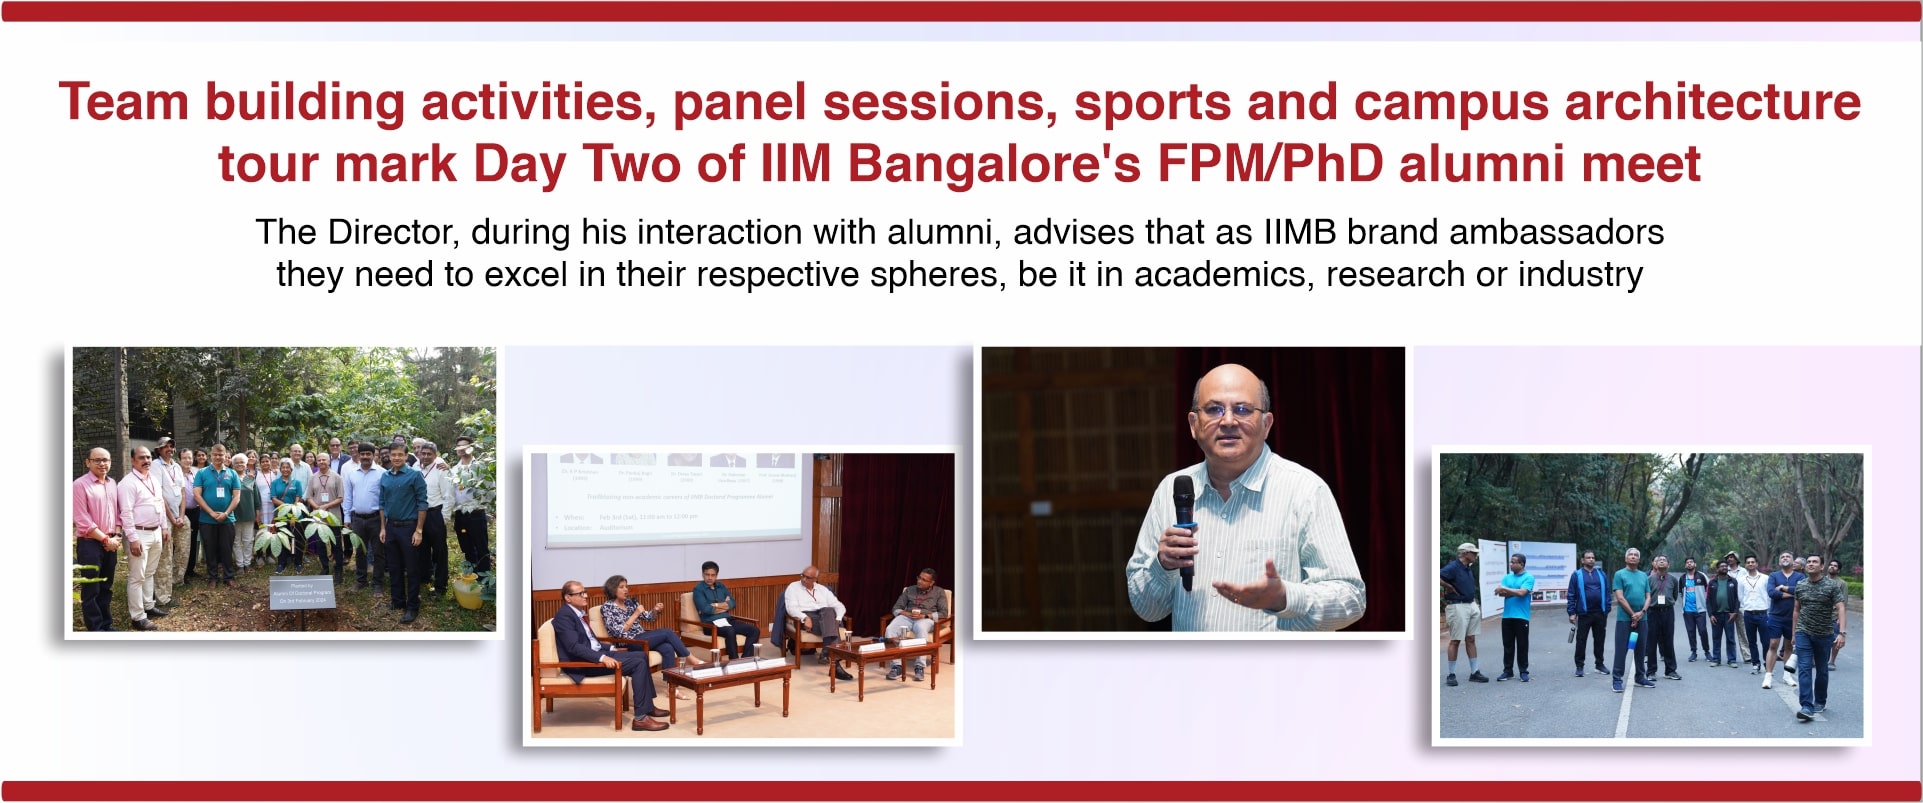 Team building activities, panel sessions, sports and campus architecture tour mark Day Two of IIM Bangalore’s FPM/PhD alumni meet